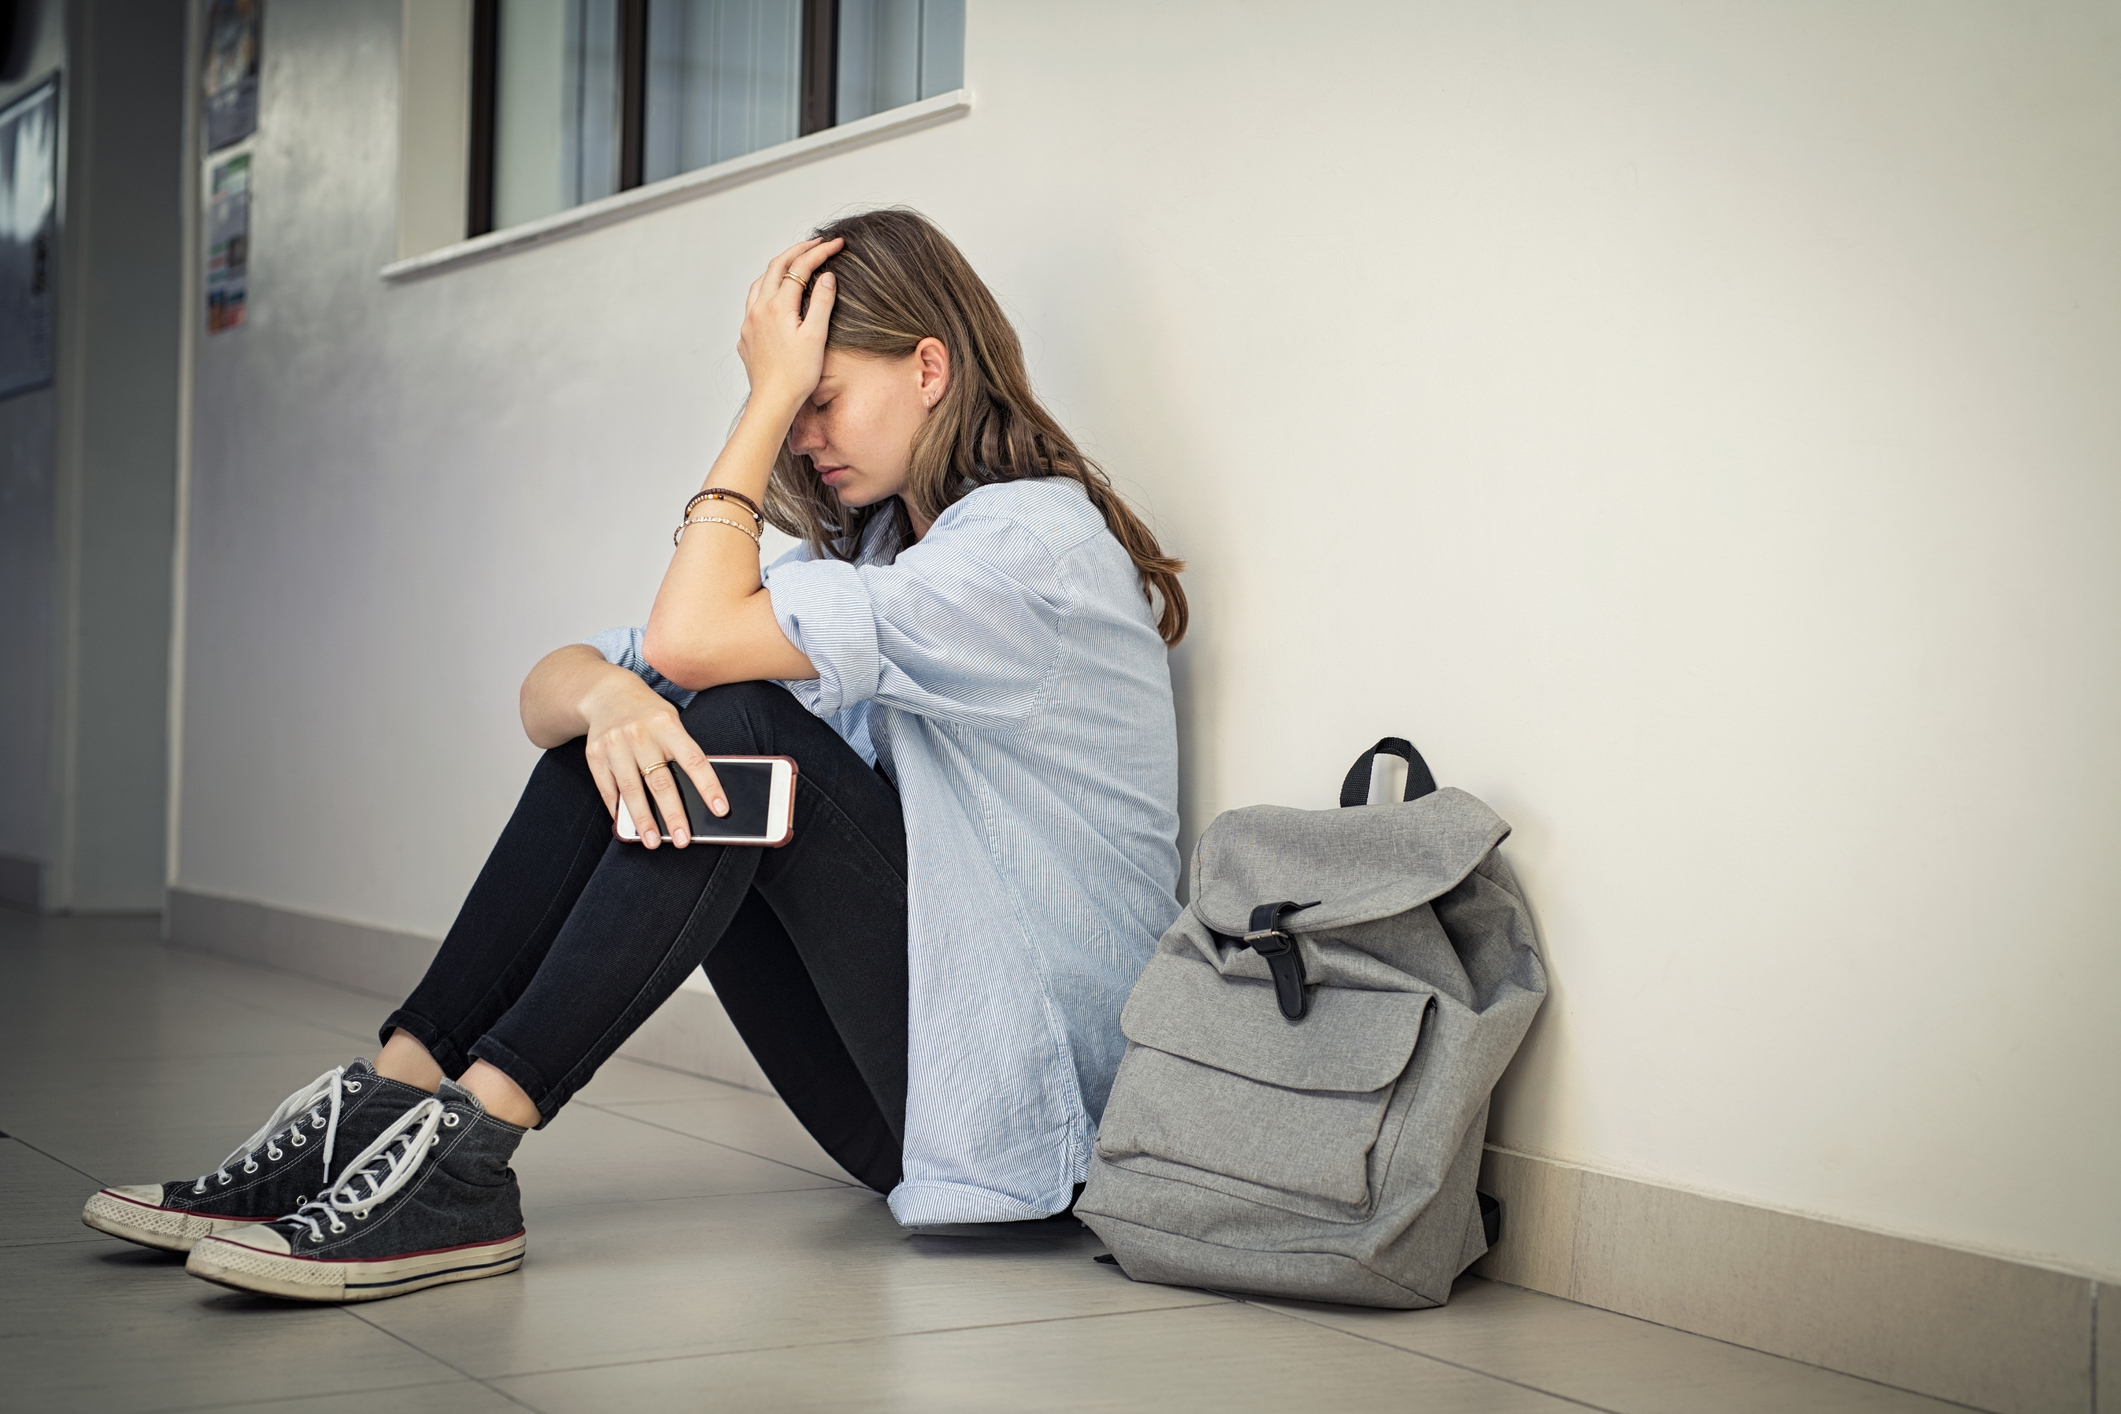 A young girl sitting on the ground next to her backpack crying